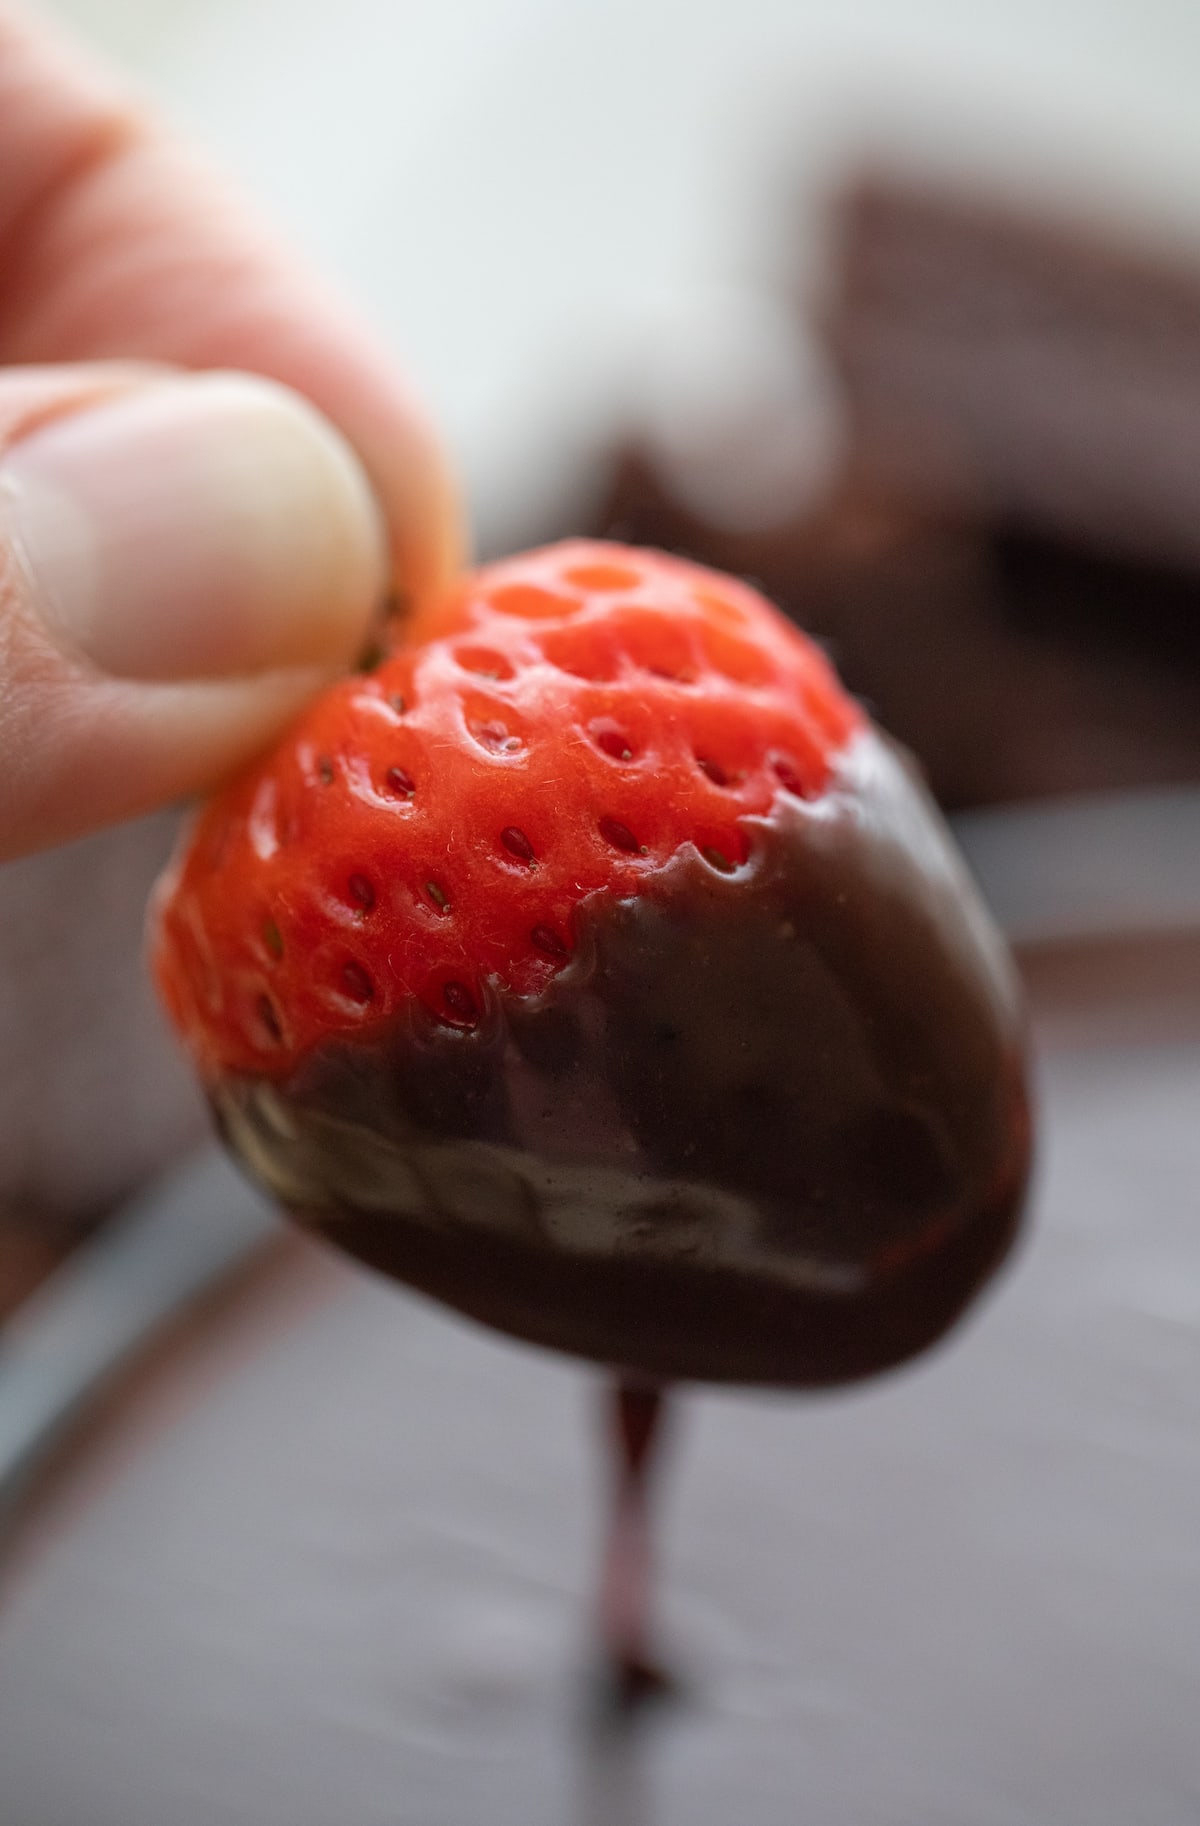 strawberry dipped into chocolate